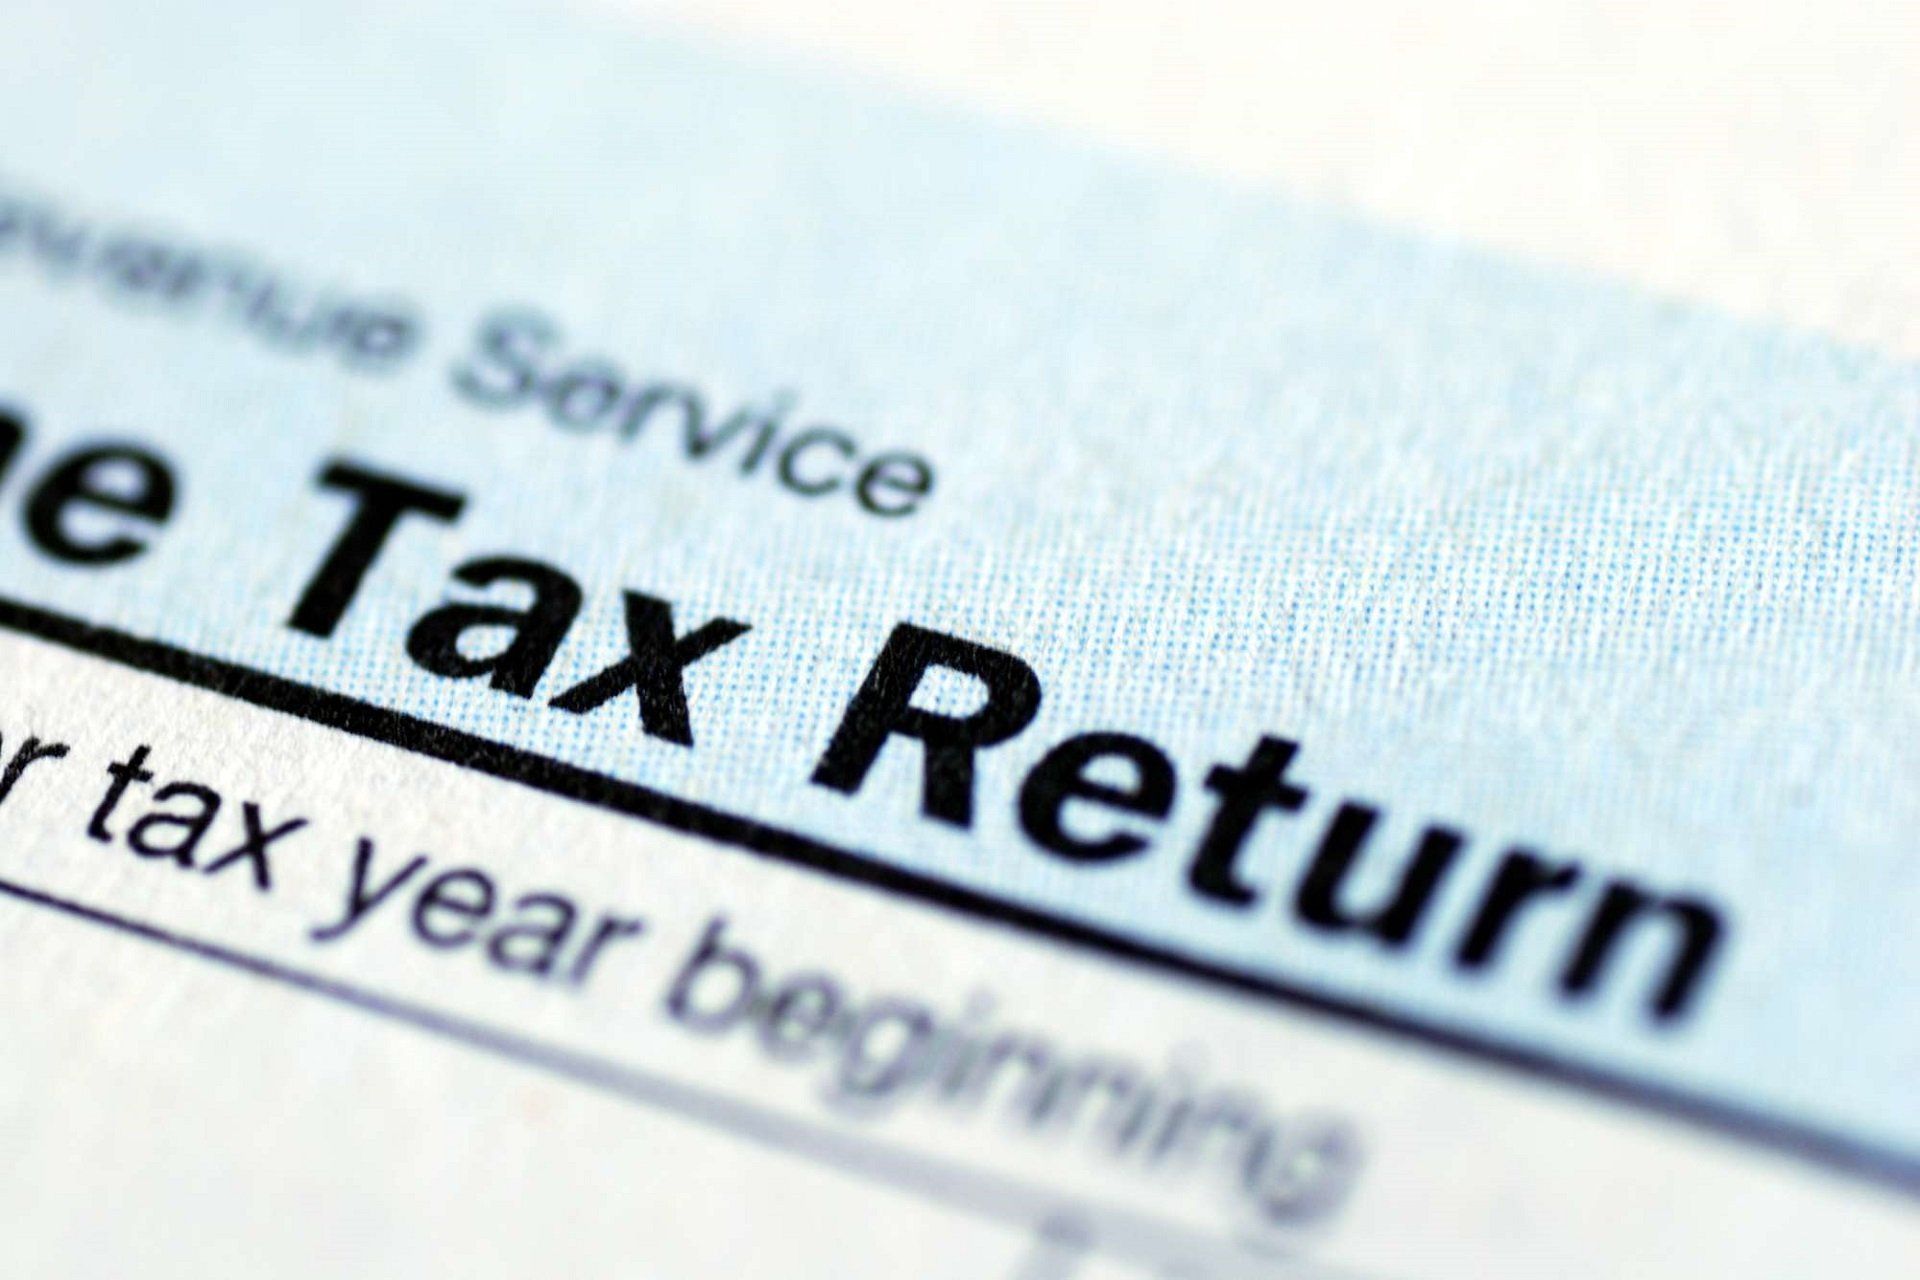 if you forgot to file some tax returns